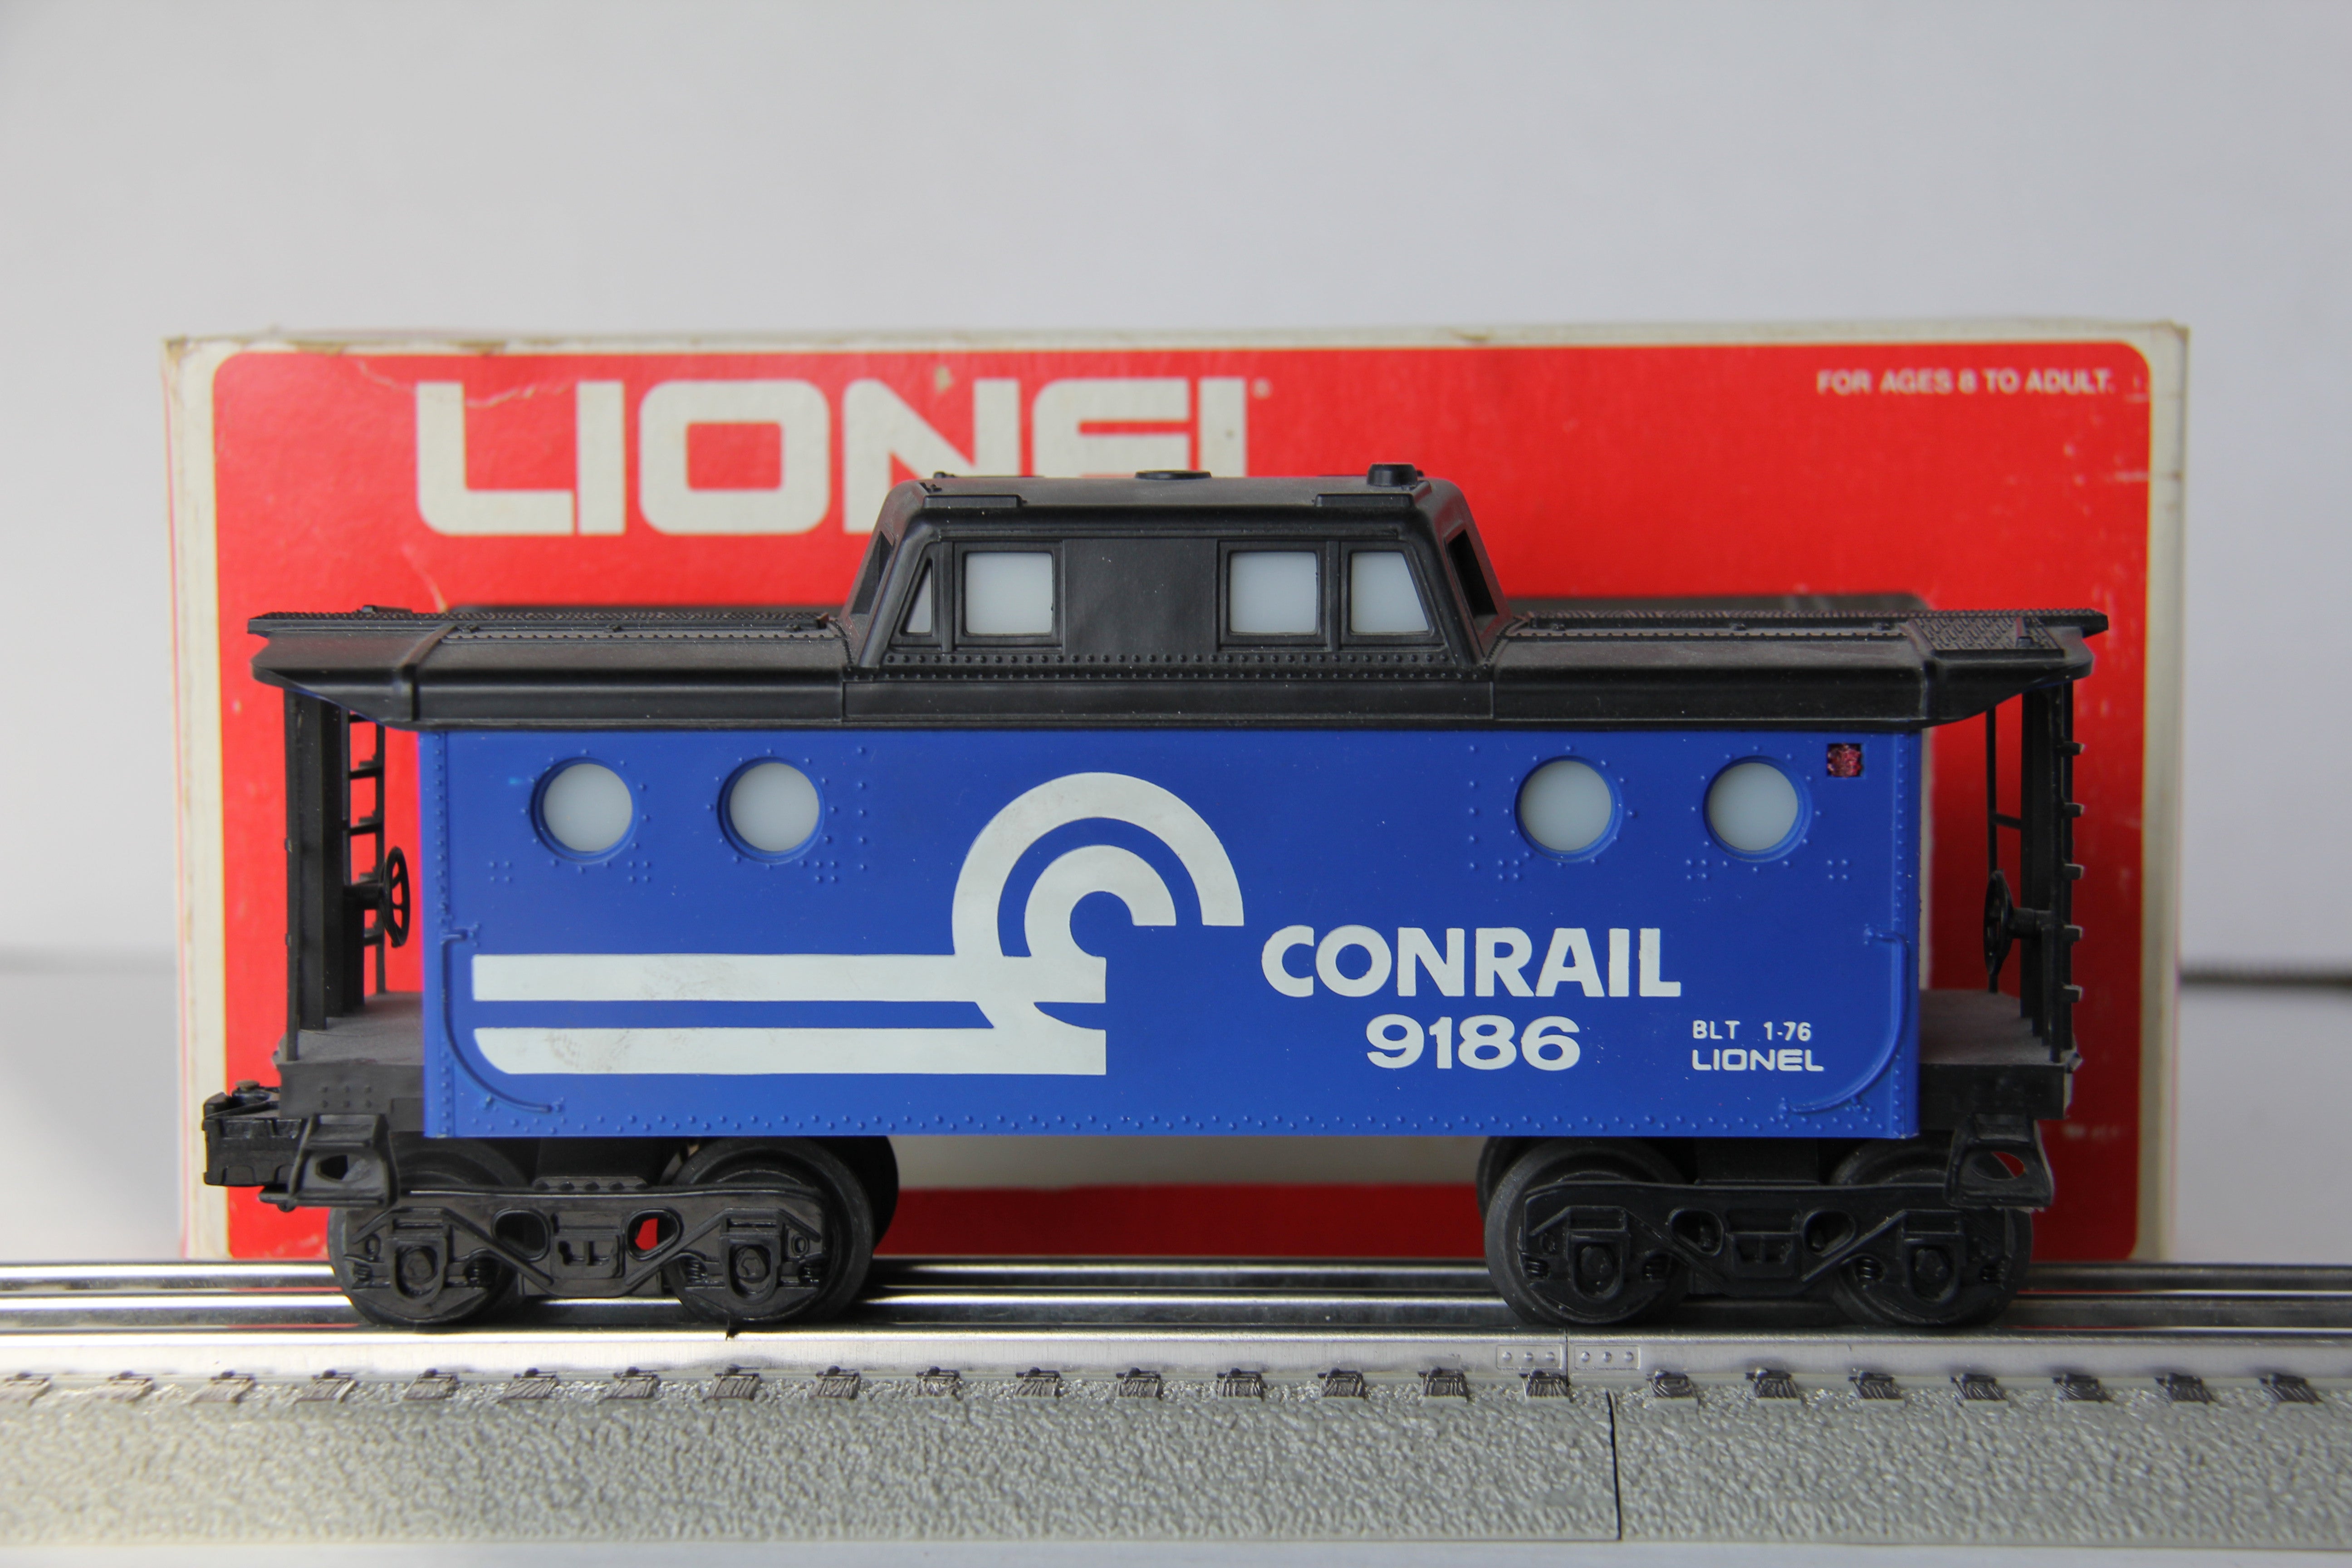 Lionel 6-9186 Conrail Lighted Caboose-Second hand-M3979